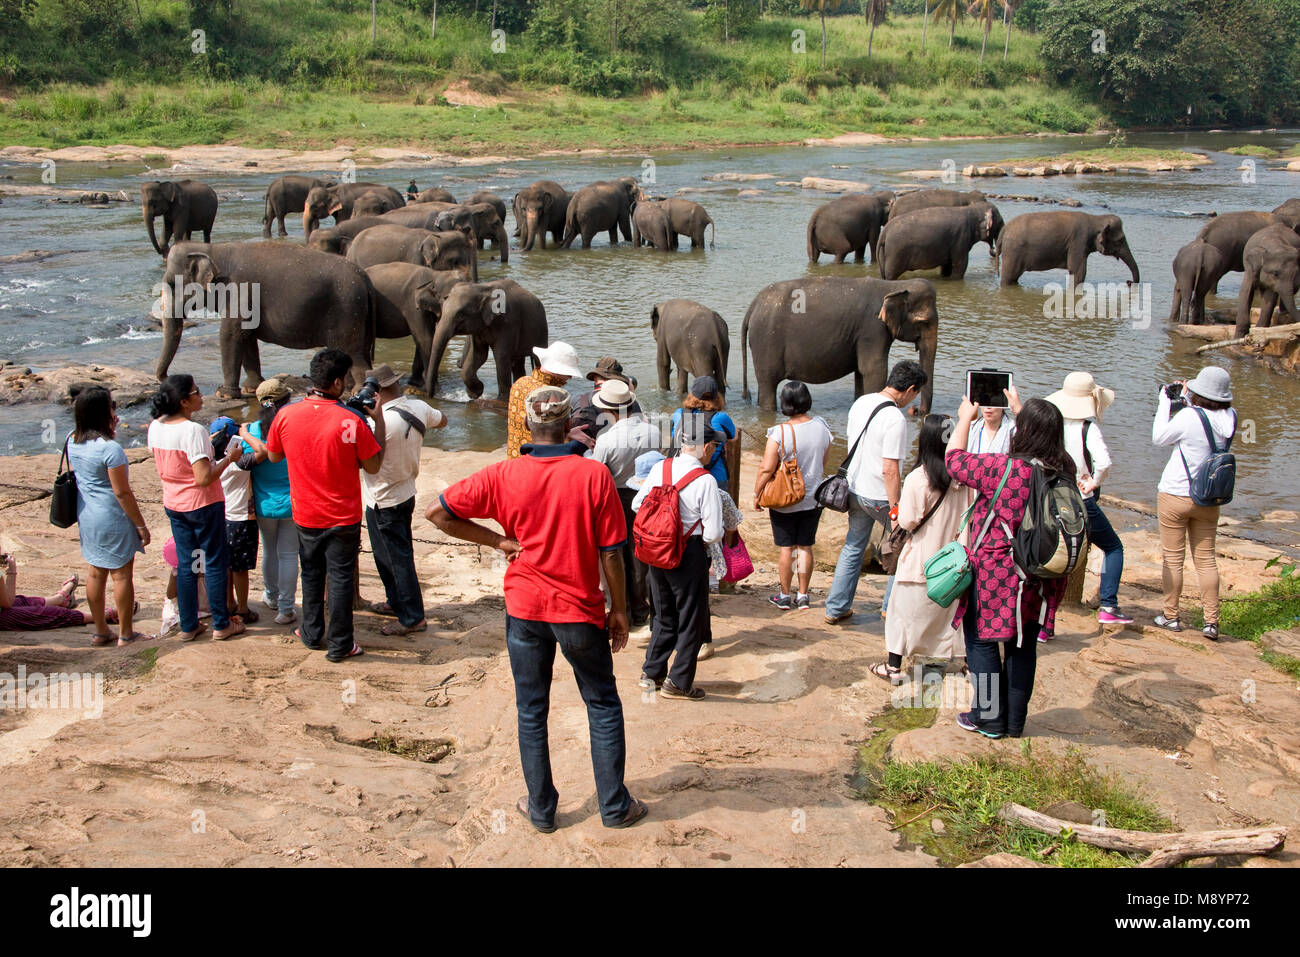 Sri Lankan elephants from the Pinnawala Elephant Orphanage bathing in the river with tourists watching and photographing them. Stock Photo